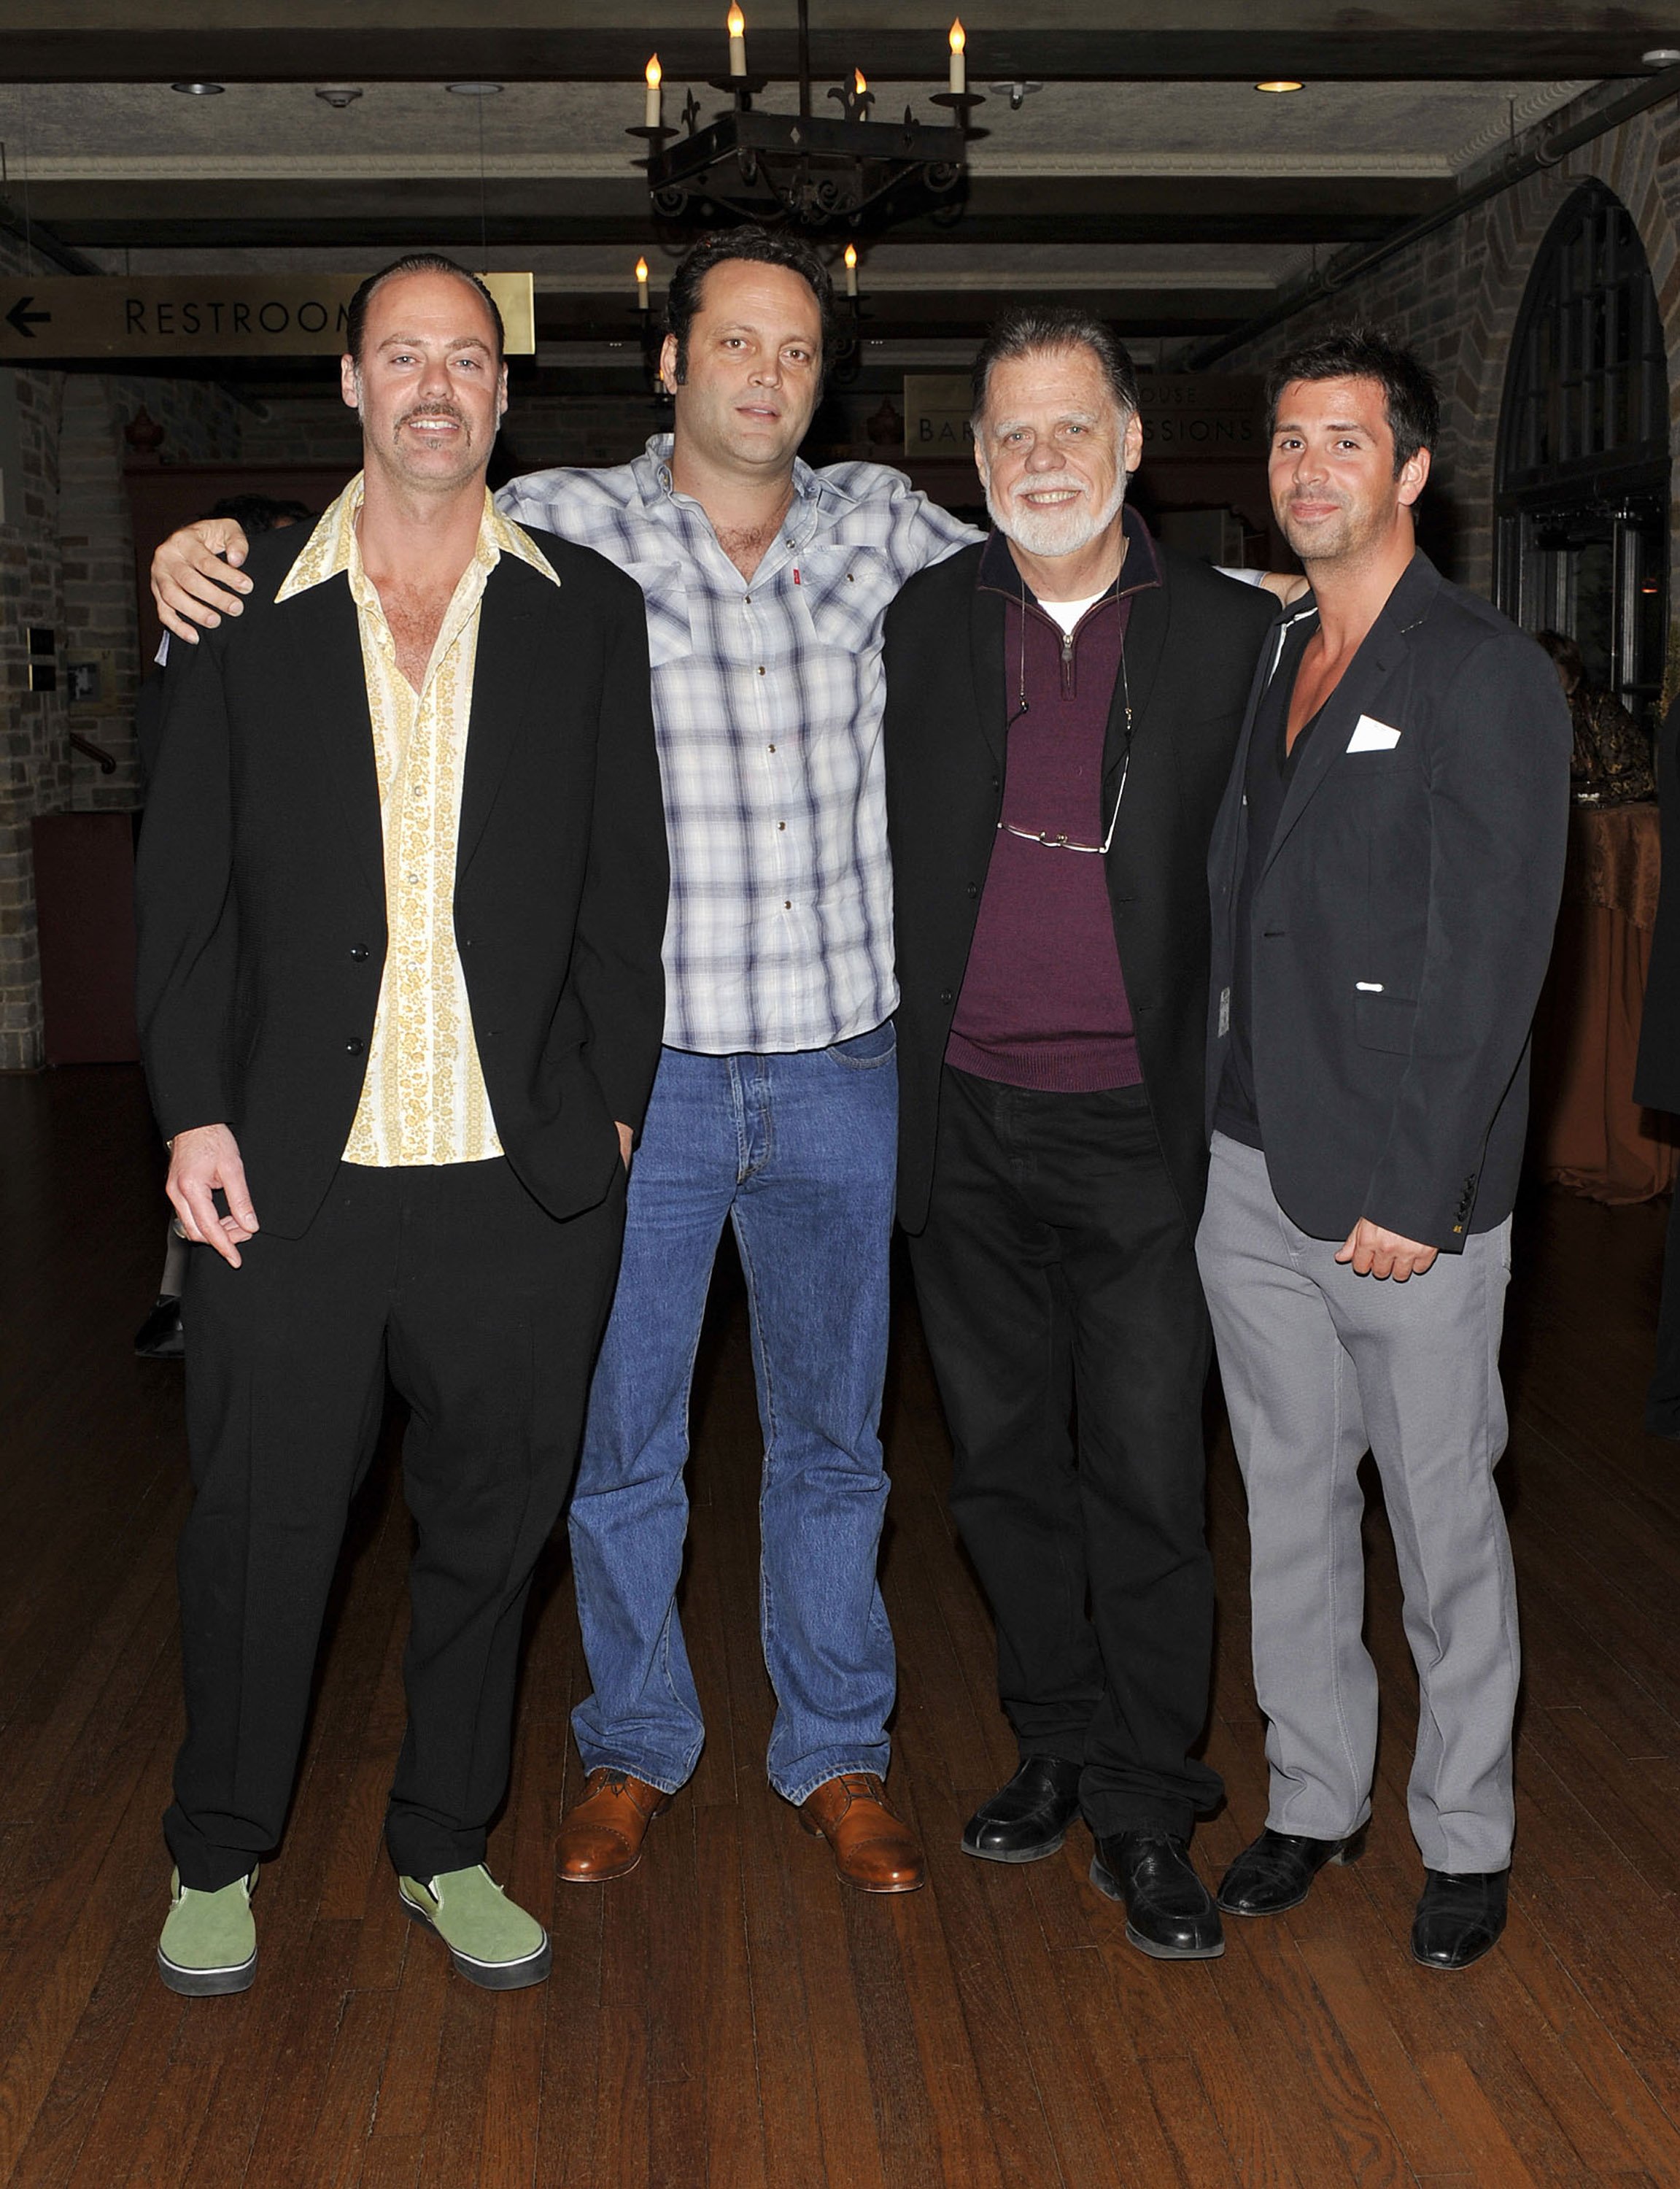 Rio Hackford, Vince Vaughn, Taylor Hackford, and Alex Hackford at the opening night of "Louis & Keely" on March 19, 2009, in Los Angeles, California. | Source: John M. Heller/Getty Images